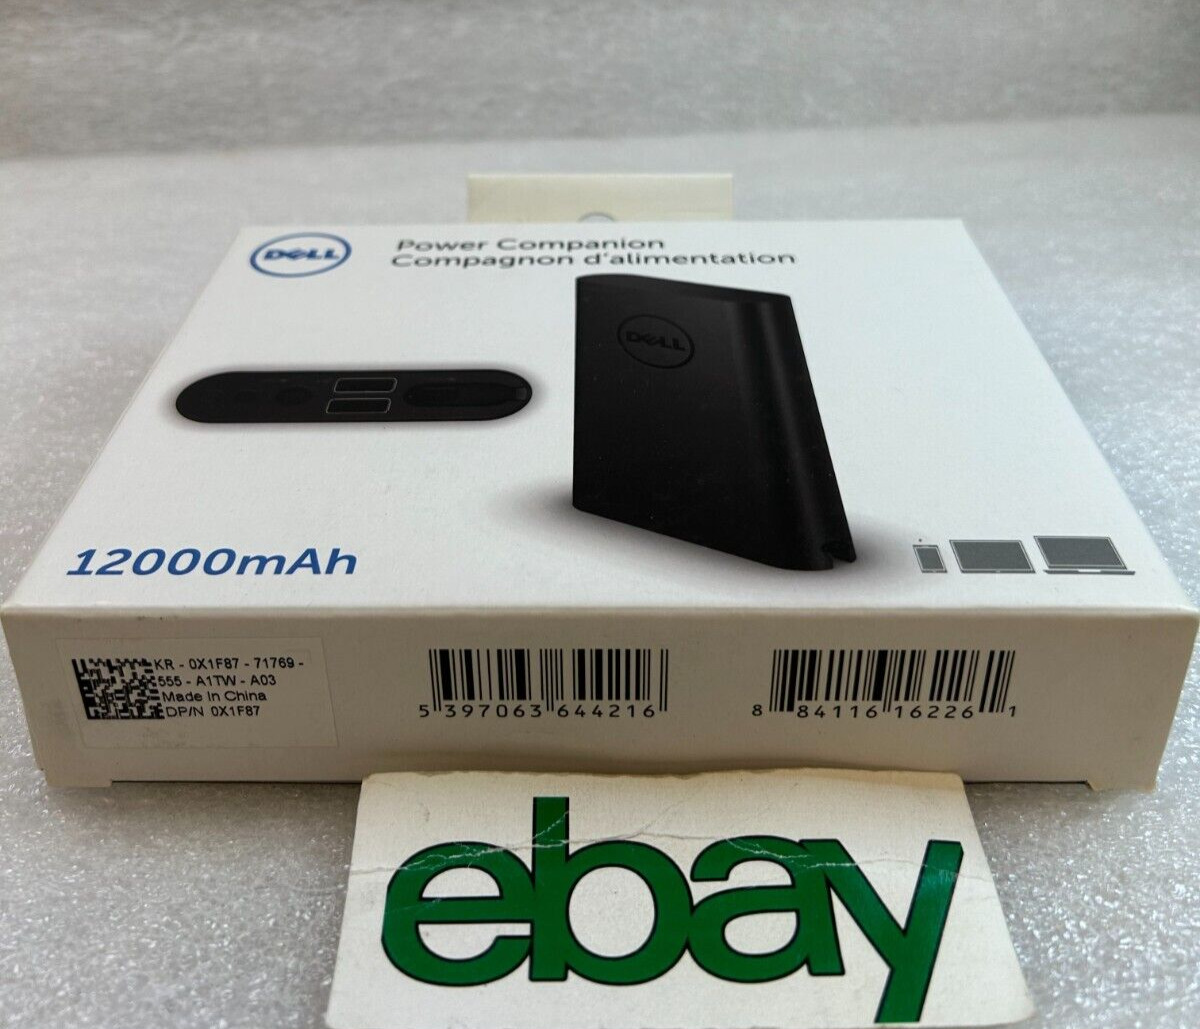 NEW Dell Power Companion 4 Cell 12000mAh Portable Power Bank External Battery